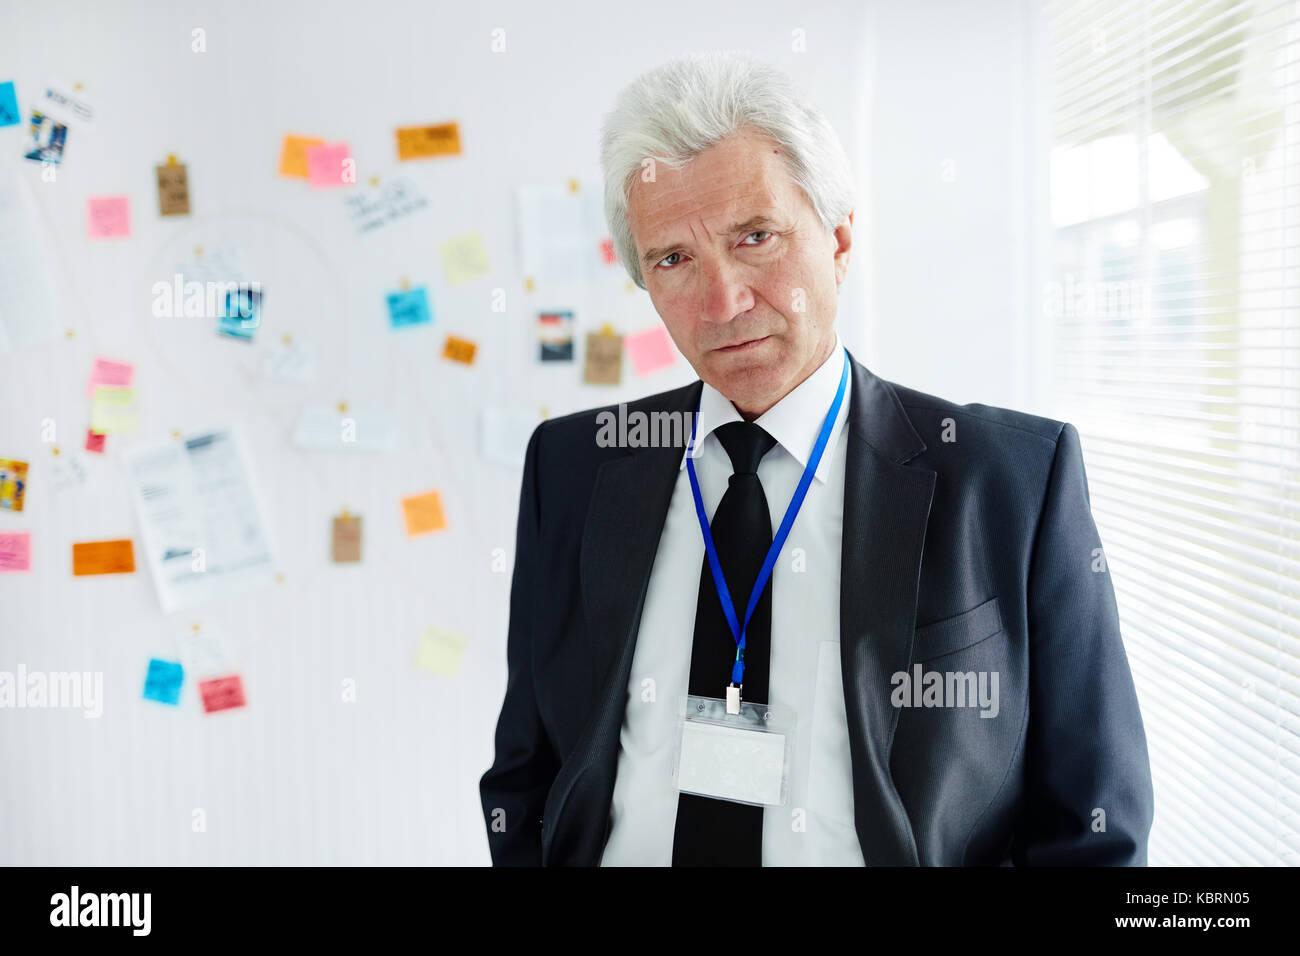 Mature Police Officer at Workplace Stock Photo